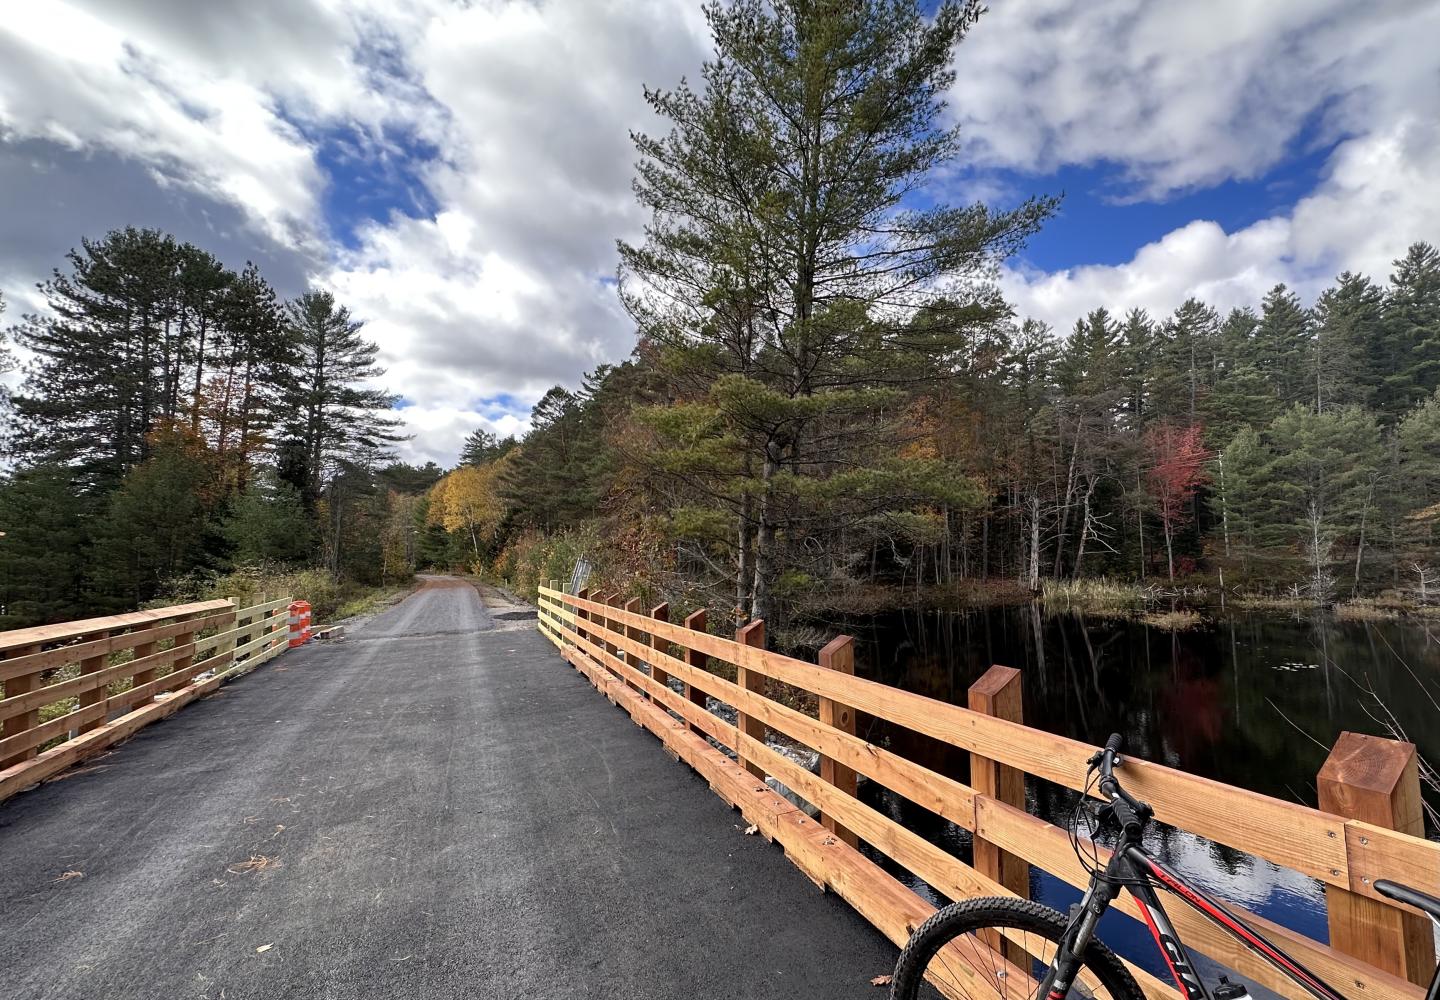 There are numerous water views on the Lake Placid to Saranac Lake section of the Adirondack Rail Trail, including this one of the Chubb River.